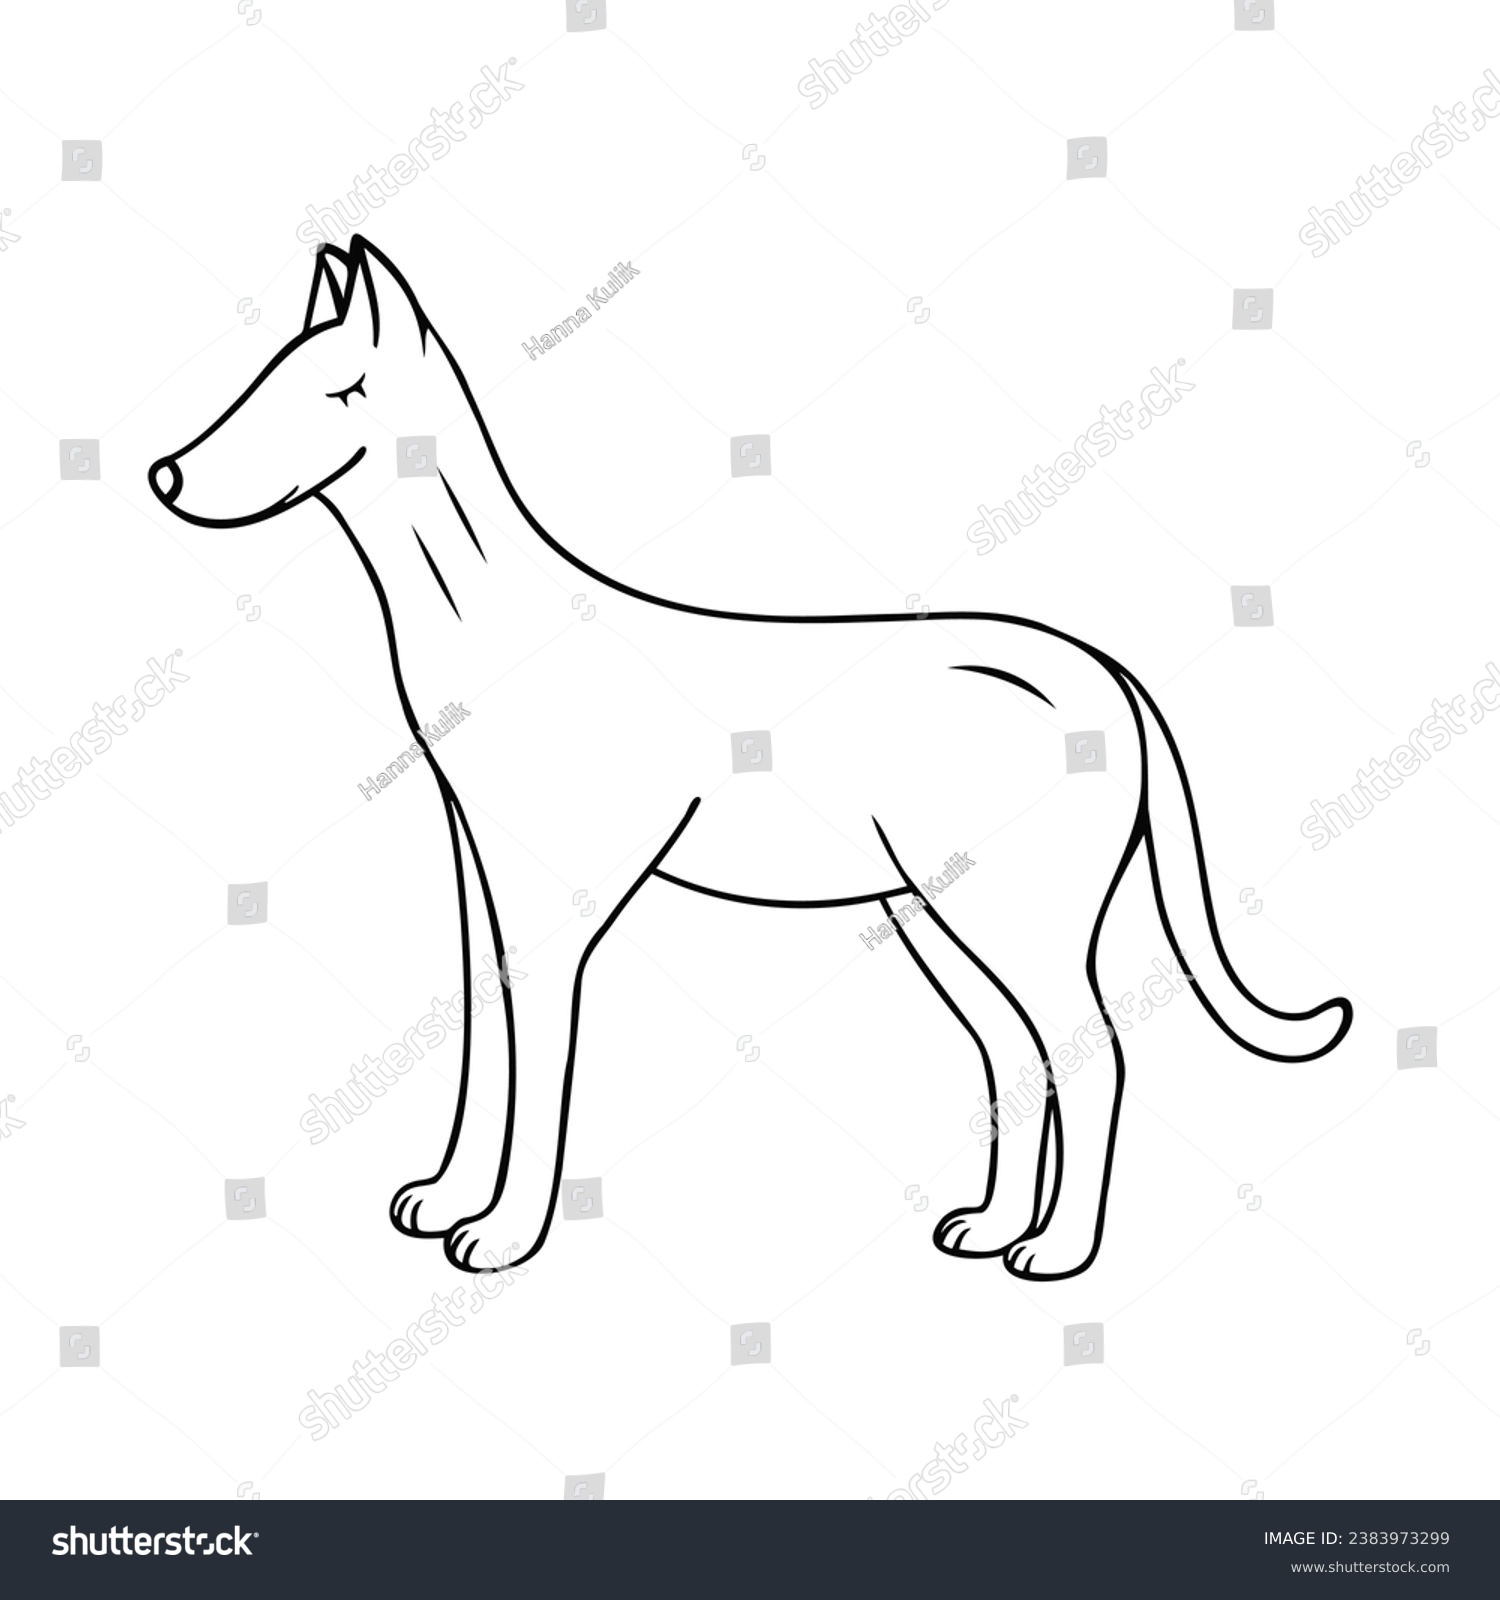 SVG of dog, Belgian Shepherd. Vector Illustration for printing, backgrounds, covers and packaging. Image can be used for greeting cards, posters, stickers and textile. Isolated on white background. svg